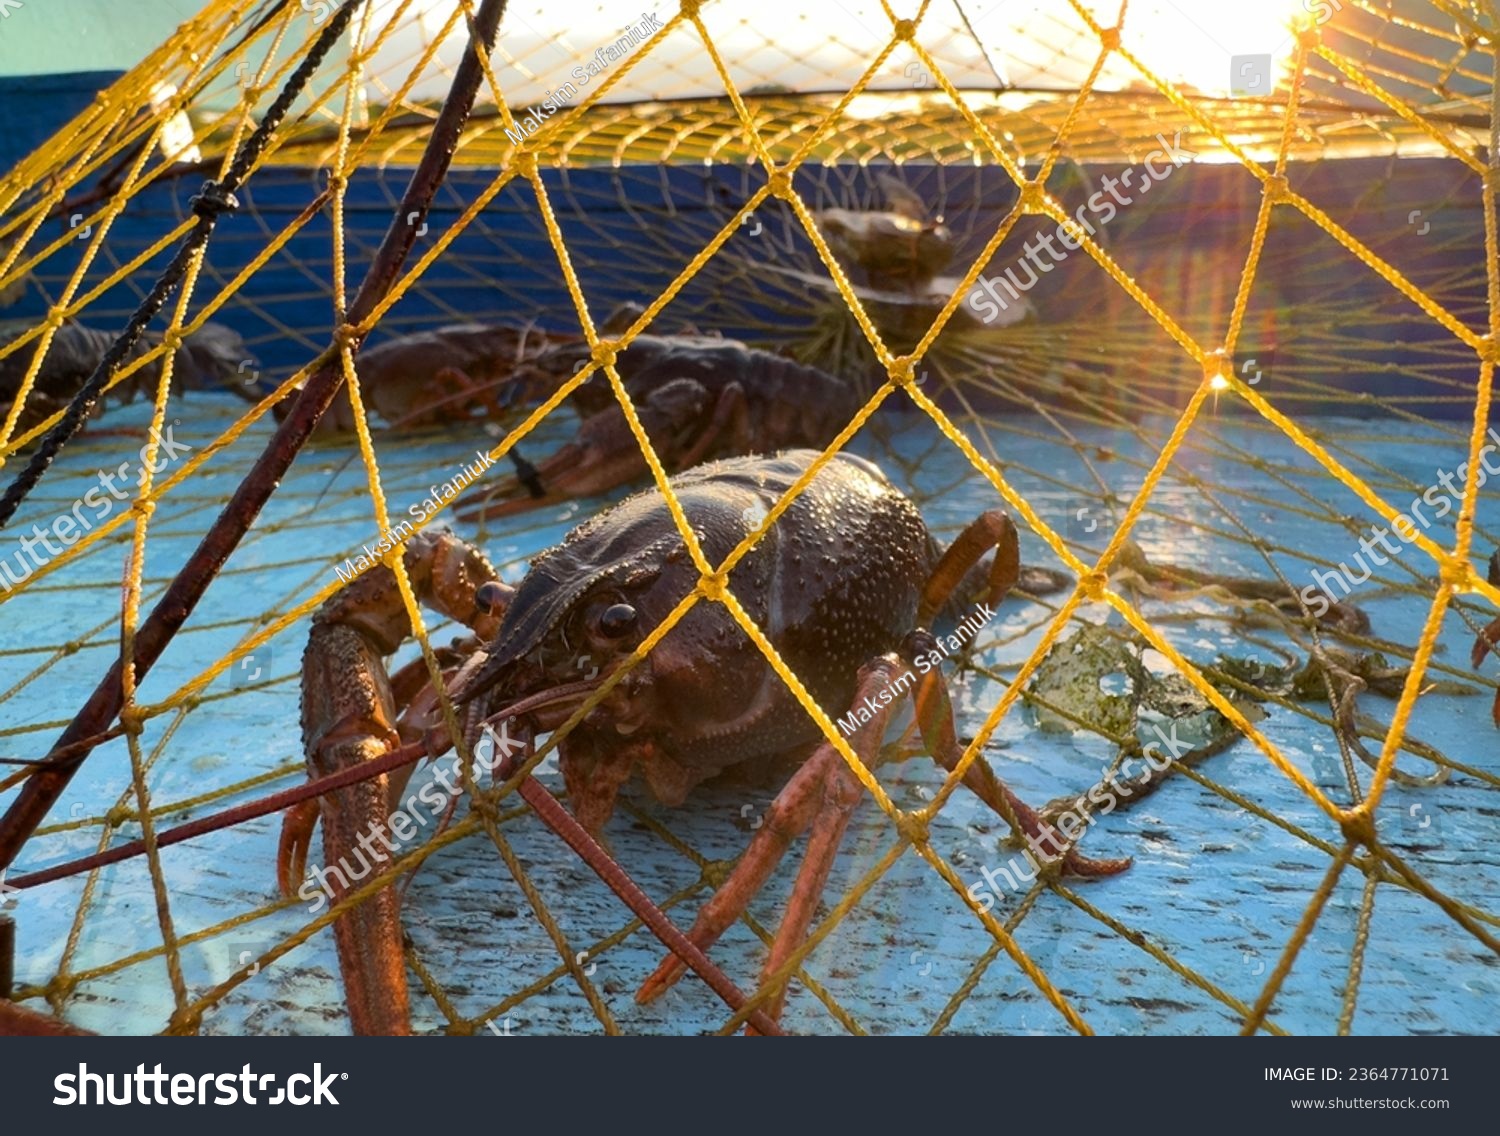 Crayfish in fisherman's traps on lake. Catching crayfish, crabs, lobster. Caught crayfish on river while fishing. Illegal crayfish traps found as poachers caught. Fishing rights on river.  #2364771071